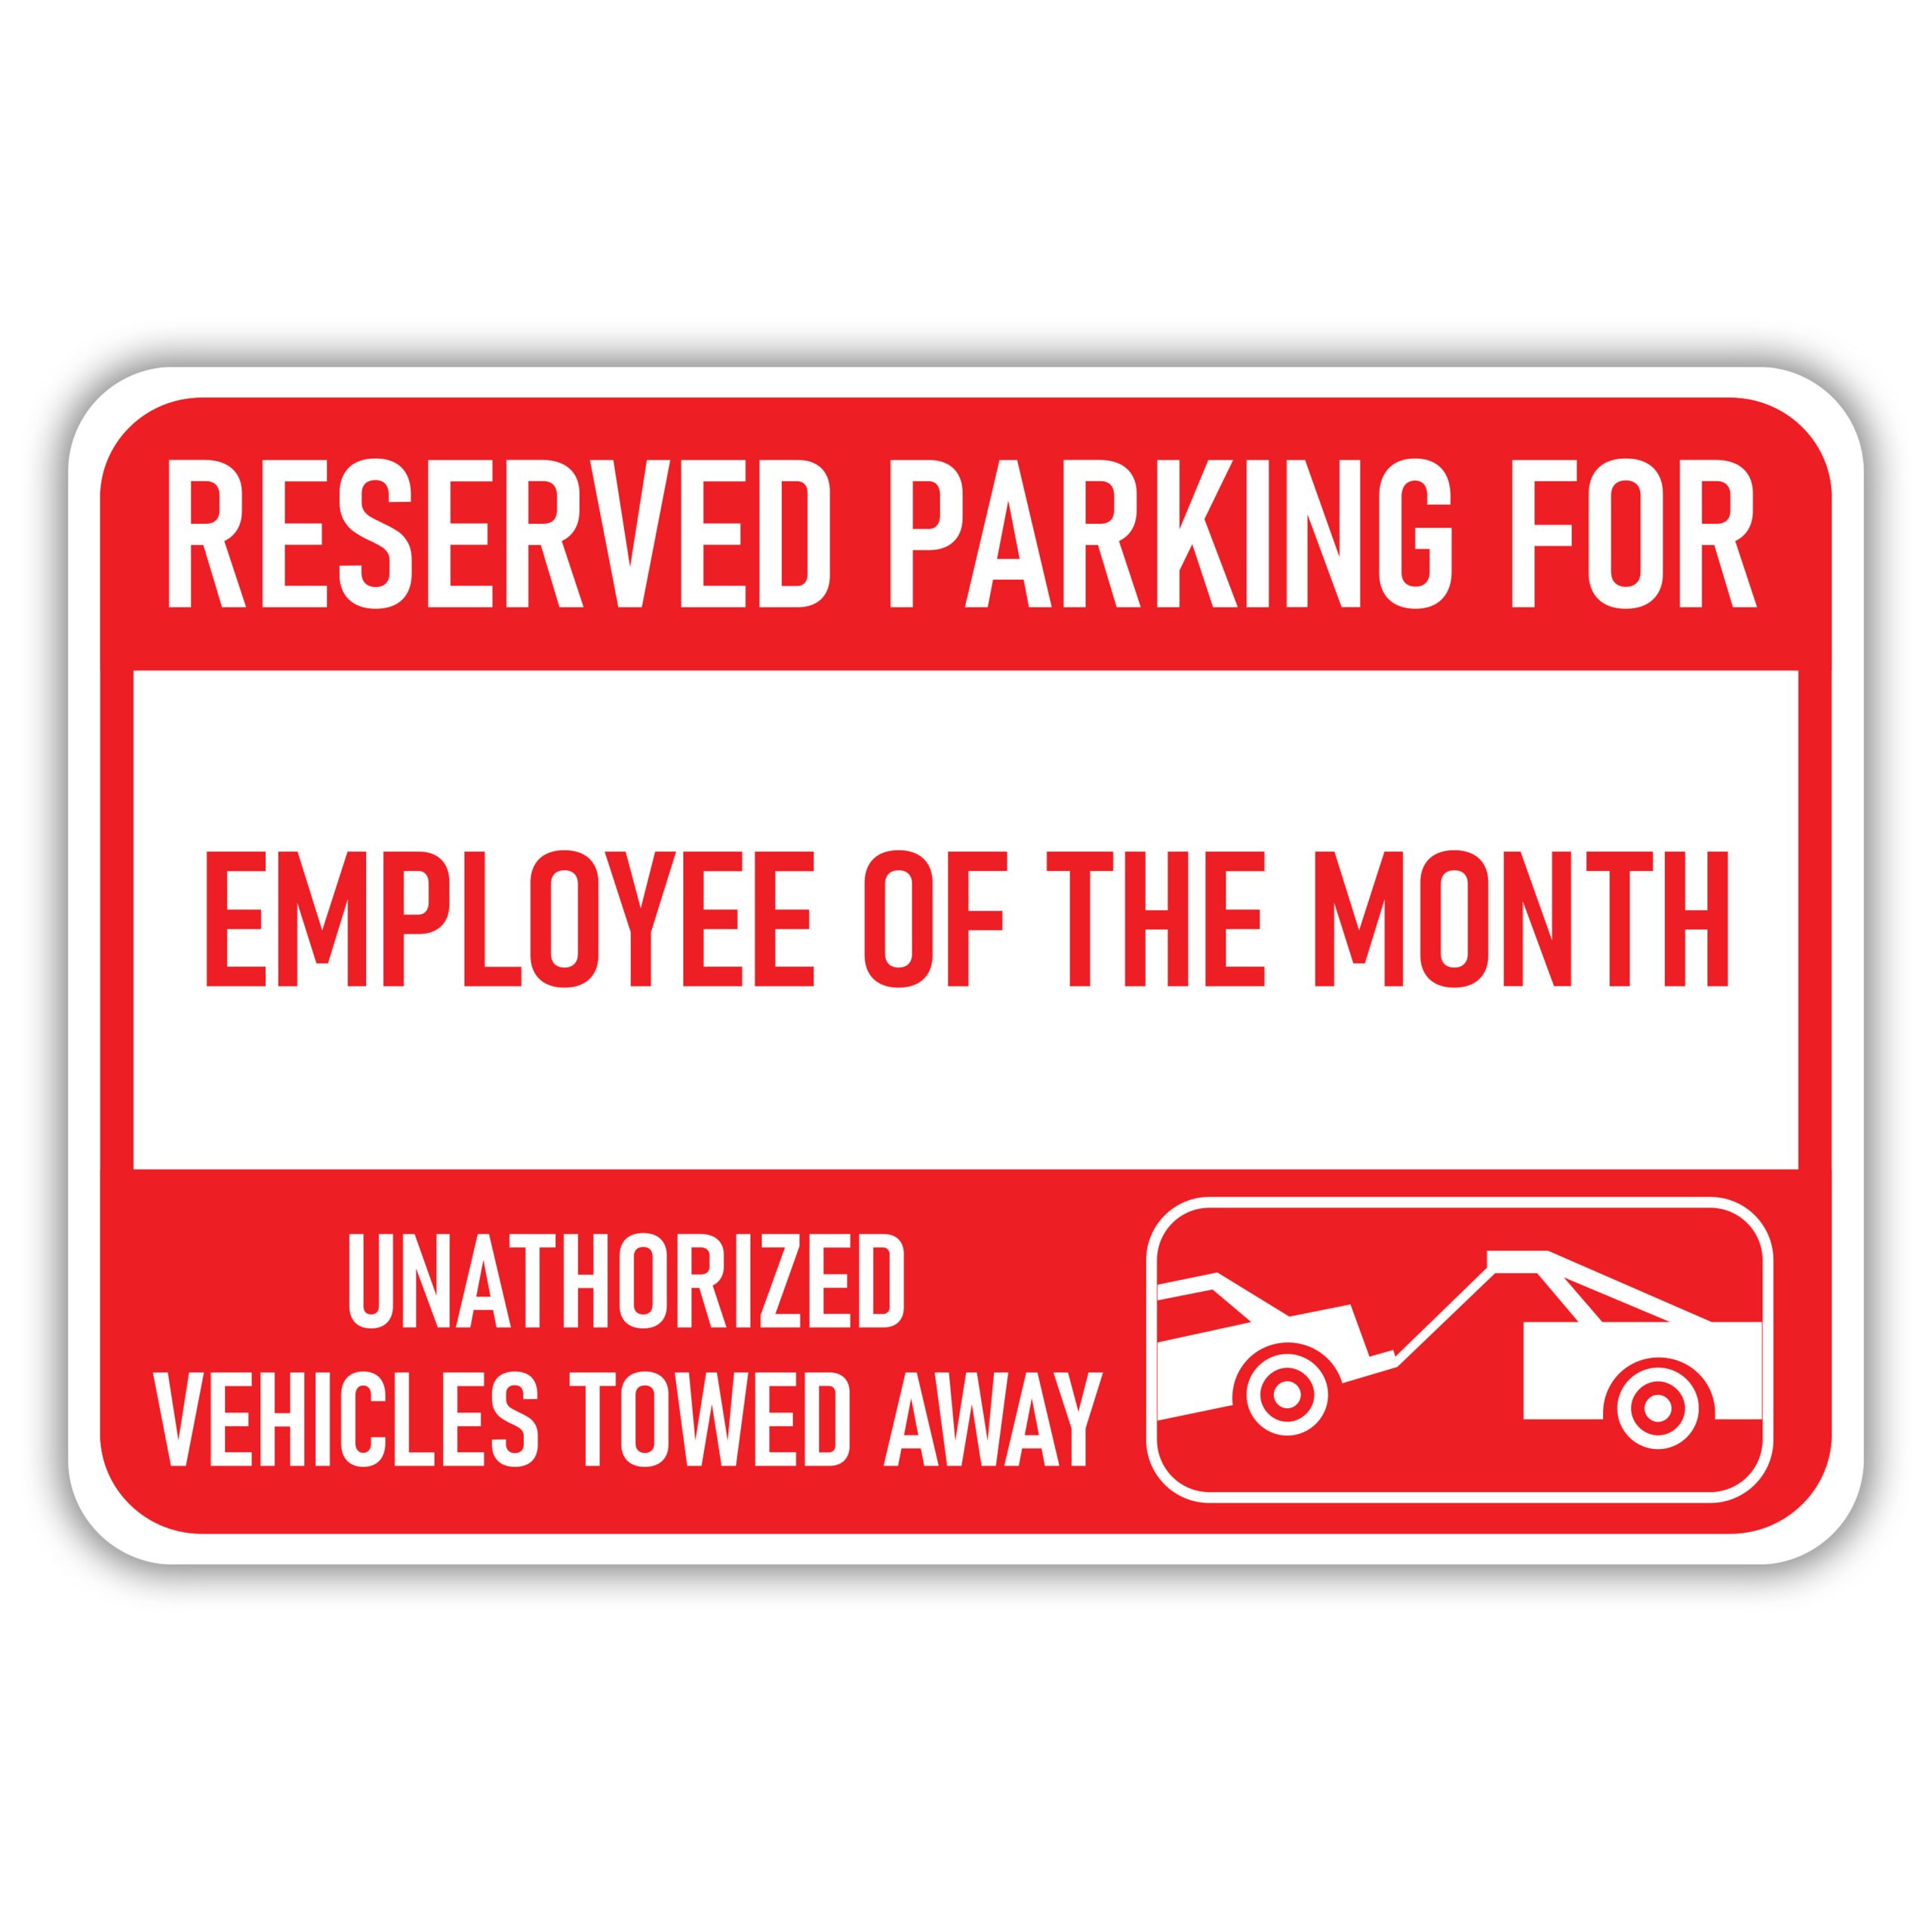 Reserved Parking For Employee Of The Month American Sign Company